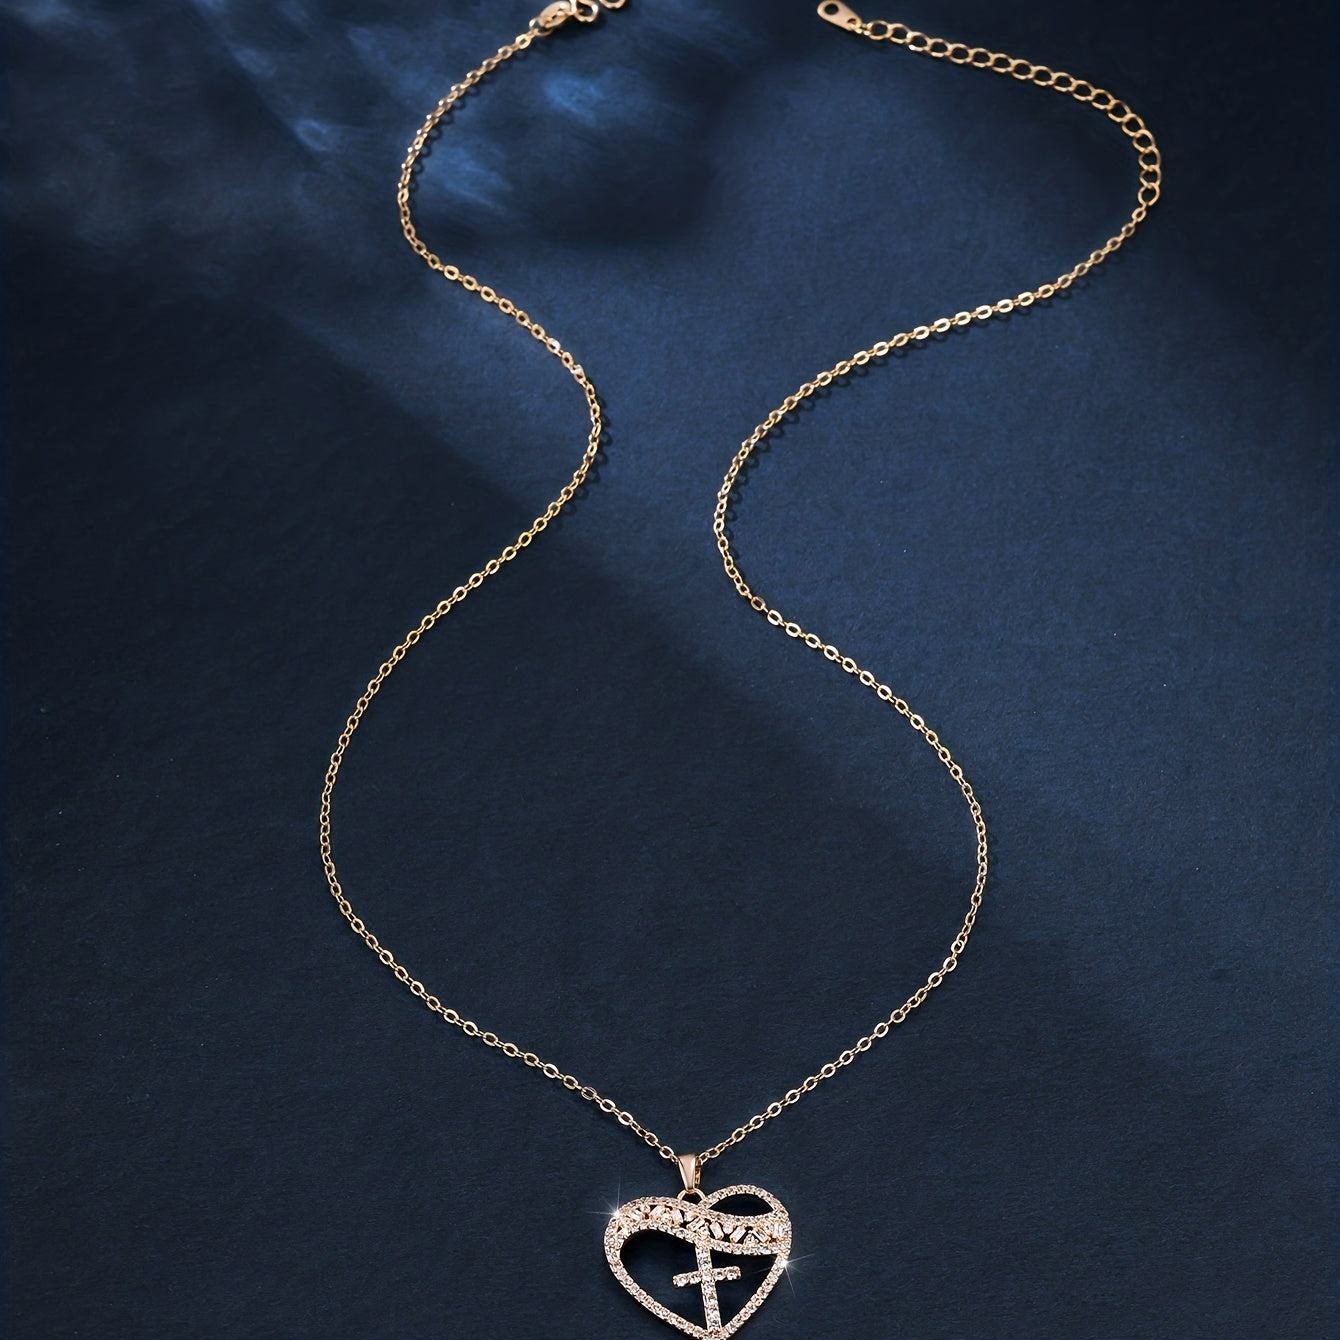 Show Your Love with this Unique Heart-Shaped Cross Pattern Pendant - Perfect Mother's Day Gift!